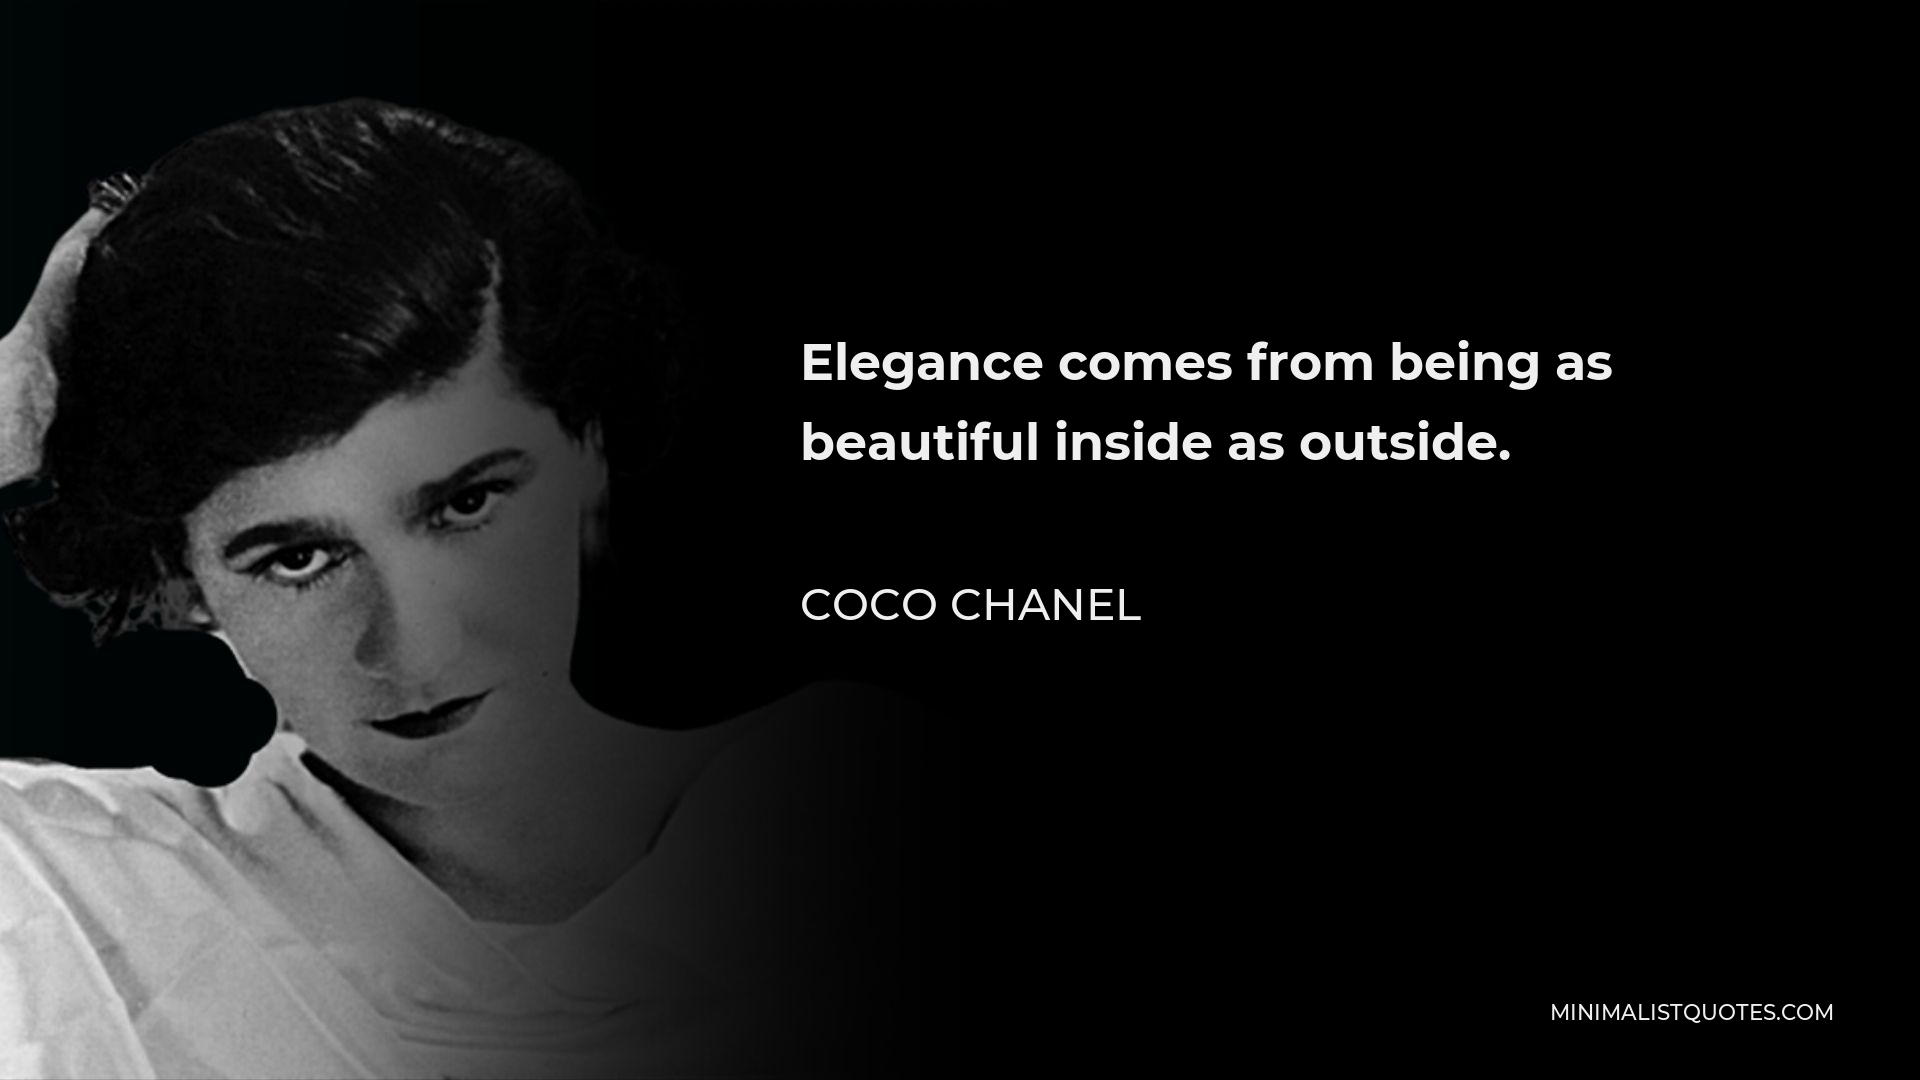 Coco Chanel Quote - Elegance comes from being as beautiful inside as outside.